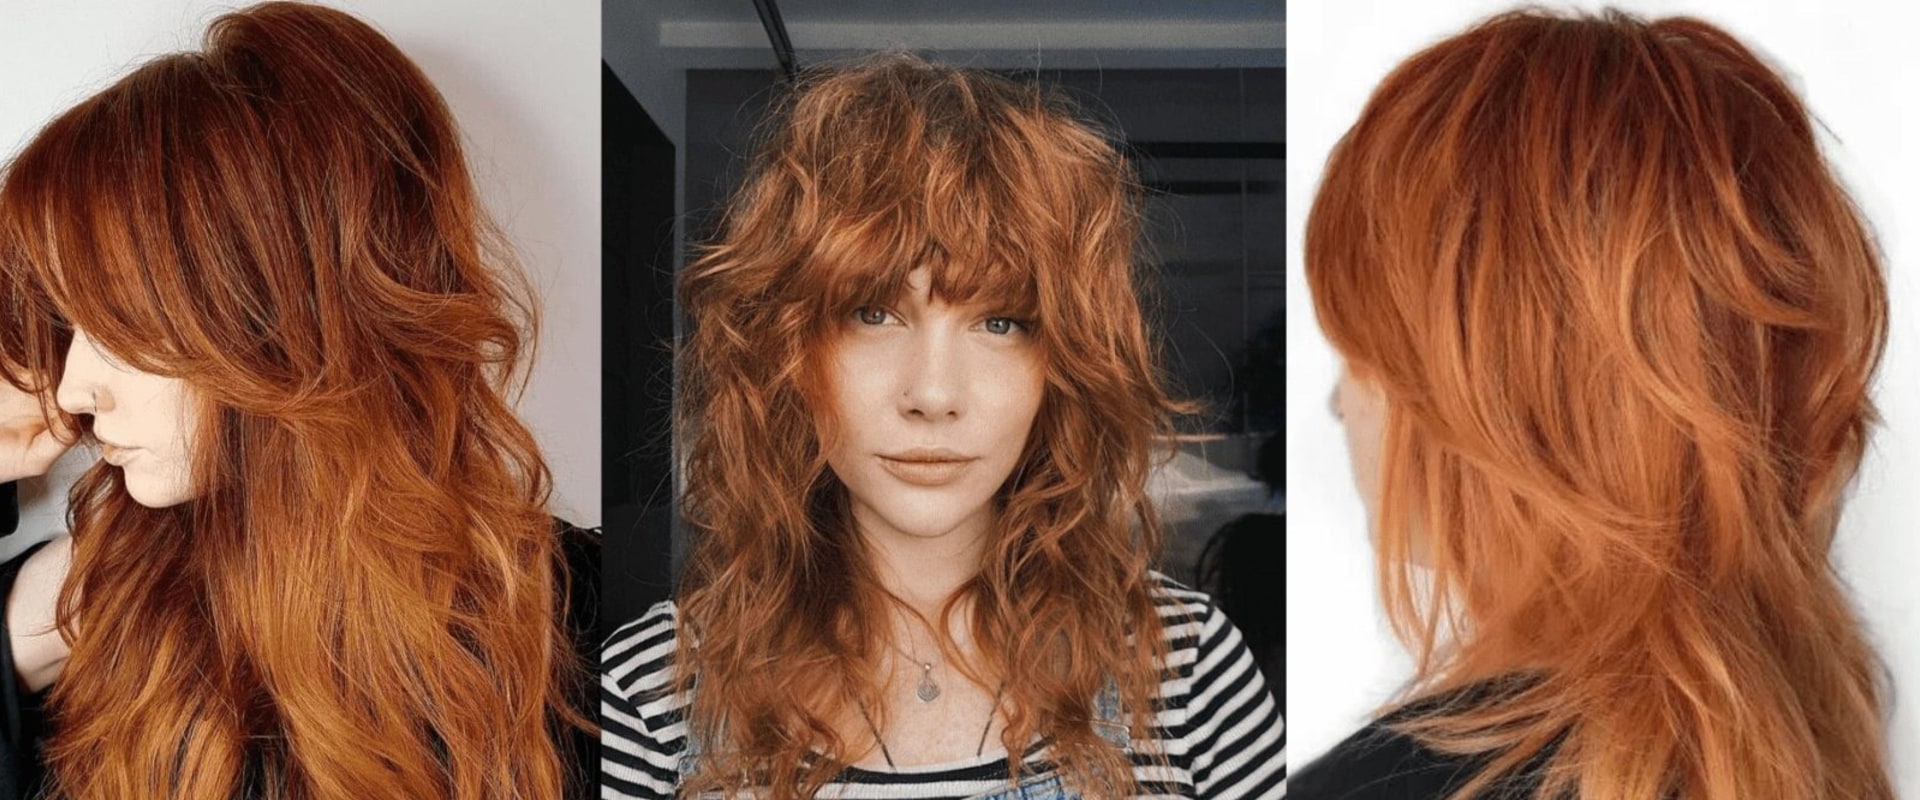 Long Shag Haircut: What You Need to Know